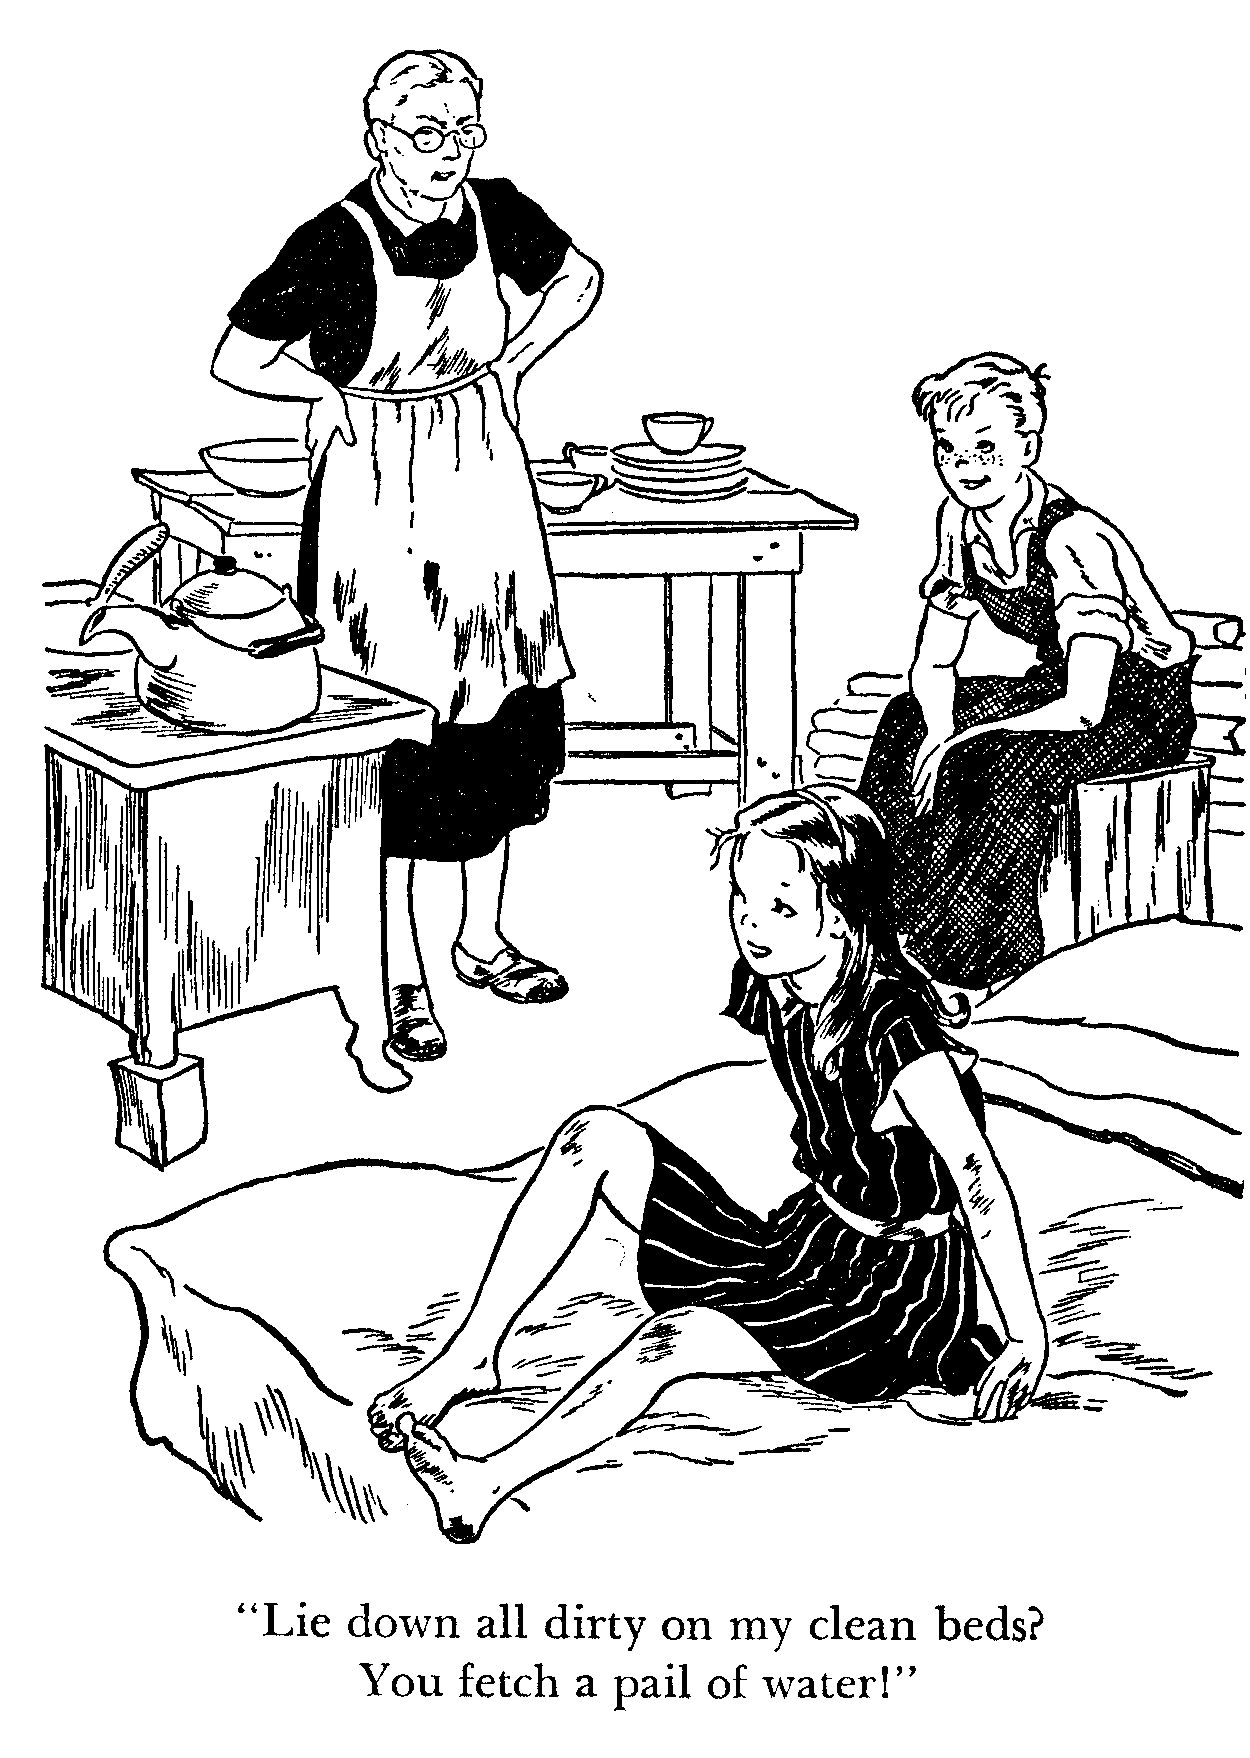 Illustration: Lying down on the beds